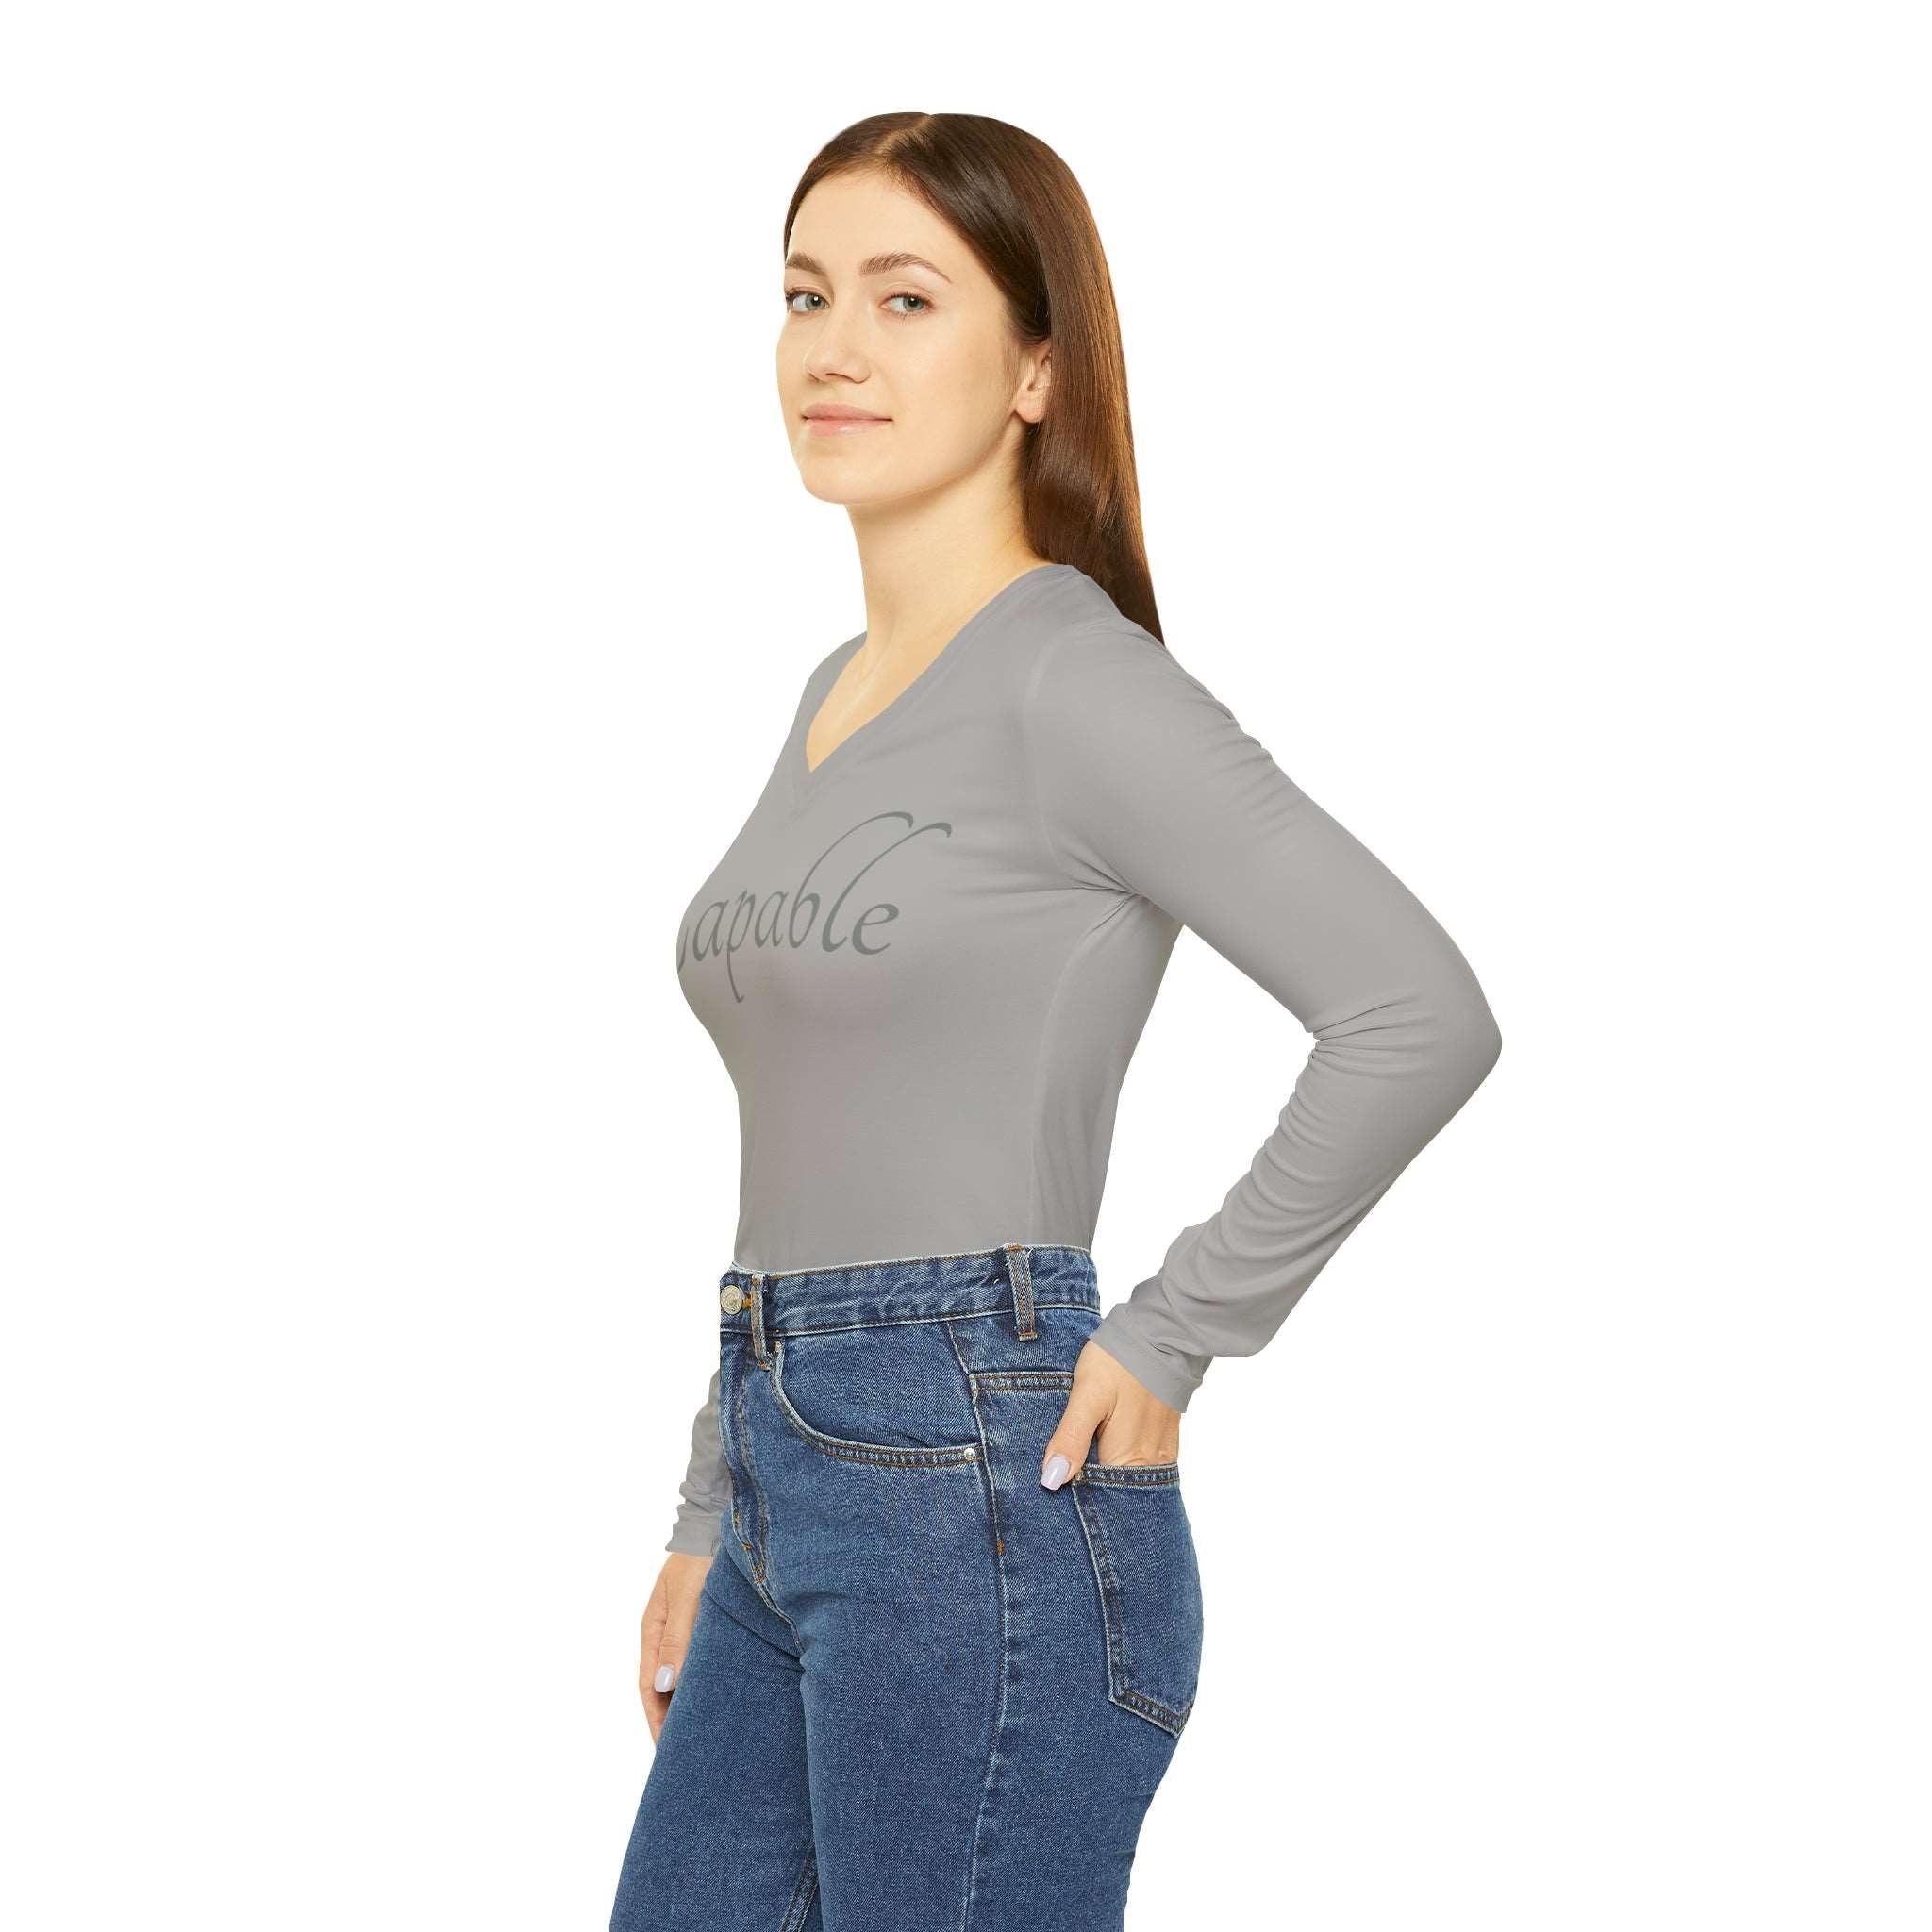 Capable Long Sleeve V-neck: Elevate Your Style Activewear Fashion with a Cause Long Sleeve V-neck Mental Health Initiative Pledge Donation Polyester Spandex Blend Premium Quality Stylish Apparel All Over Prints 8076948621452653571_2048_e4c4bd56-0473-4206-bca2-5727881072eb Printify